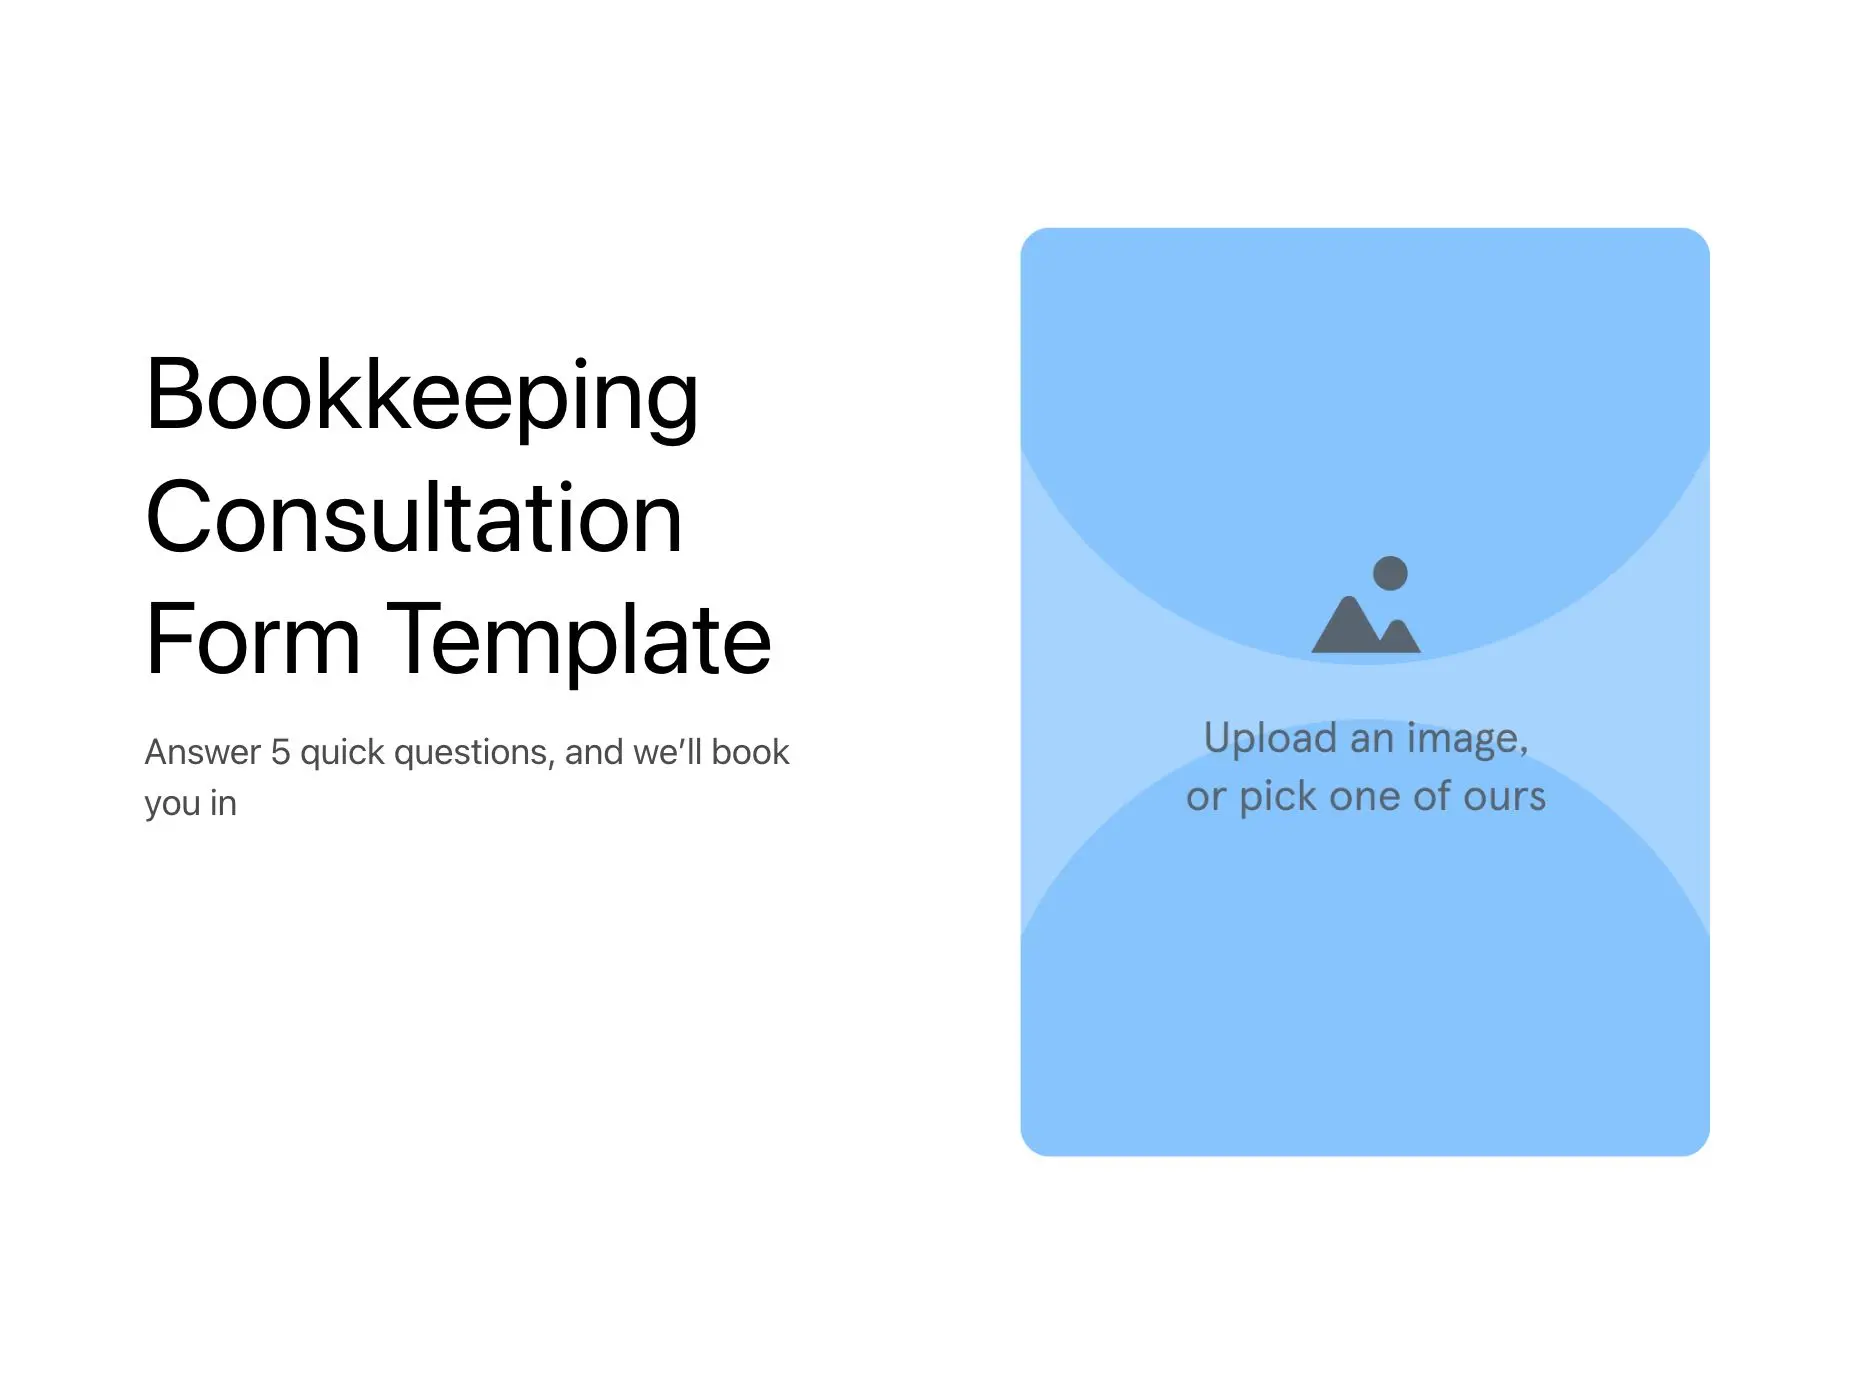 Bookkeeping Consultation Form Template Hero